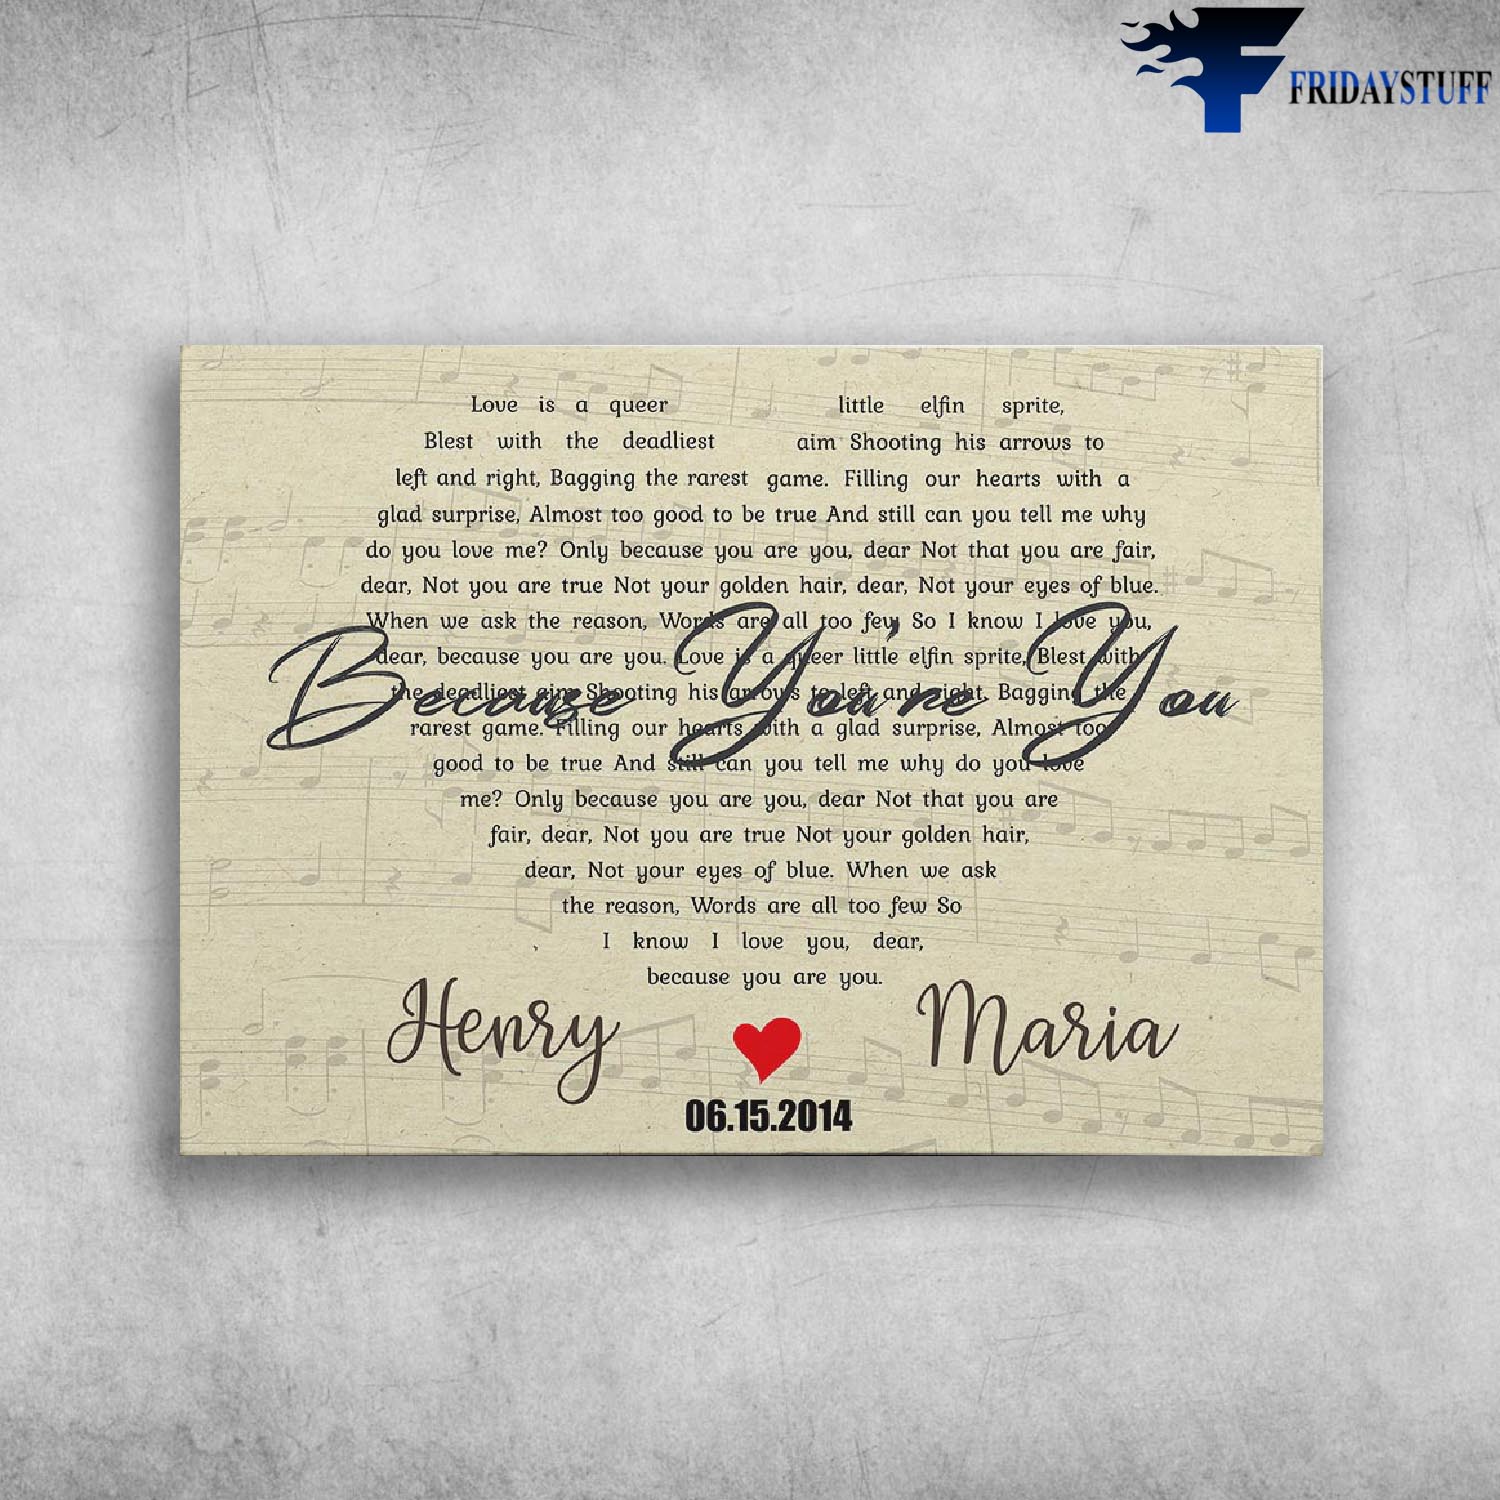 Because You're You - Henry And Maria 06.15.2014